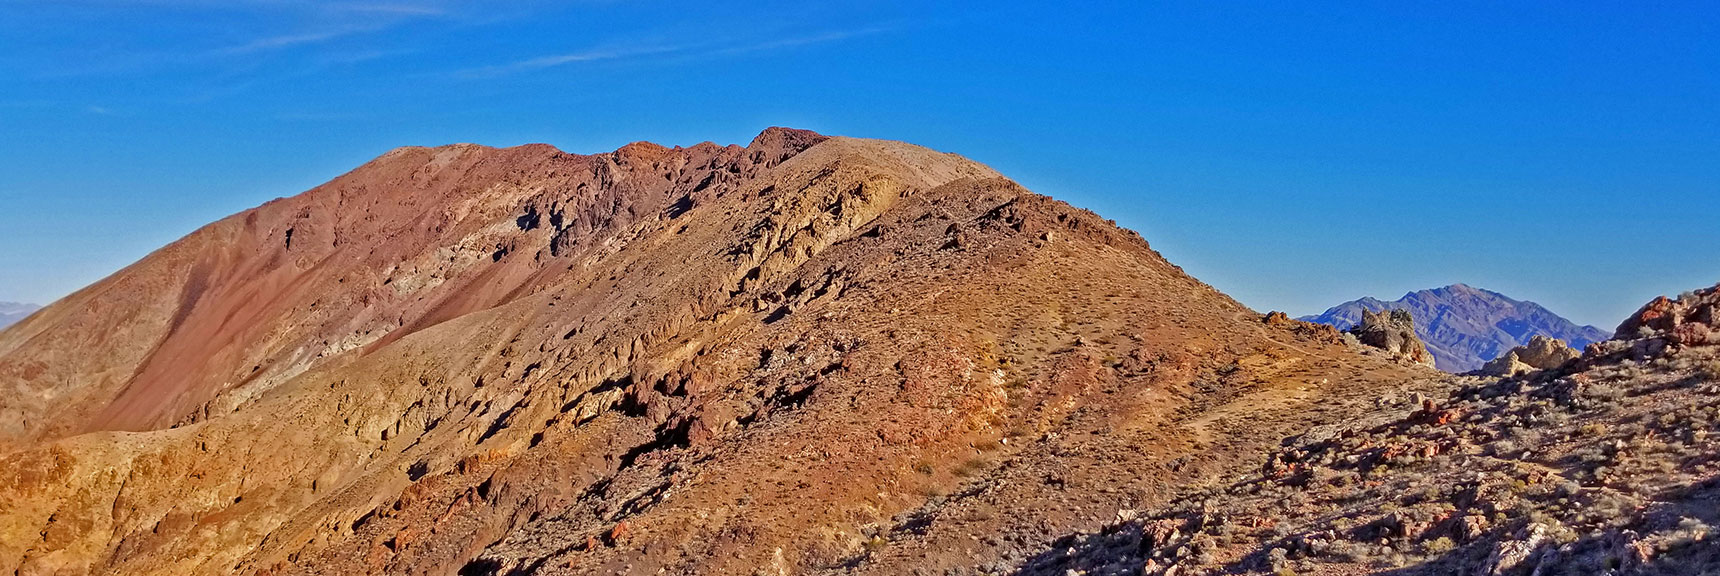 Closing in on the Final Summit Approach to Mt. Perry | Dante's View to Mt. Perry | Death Valley National Park, CA